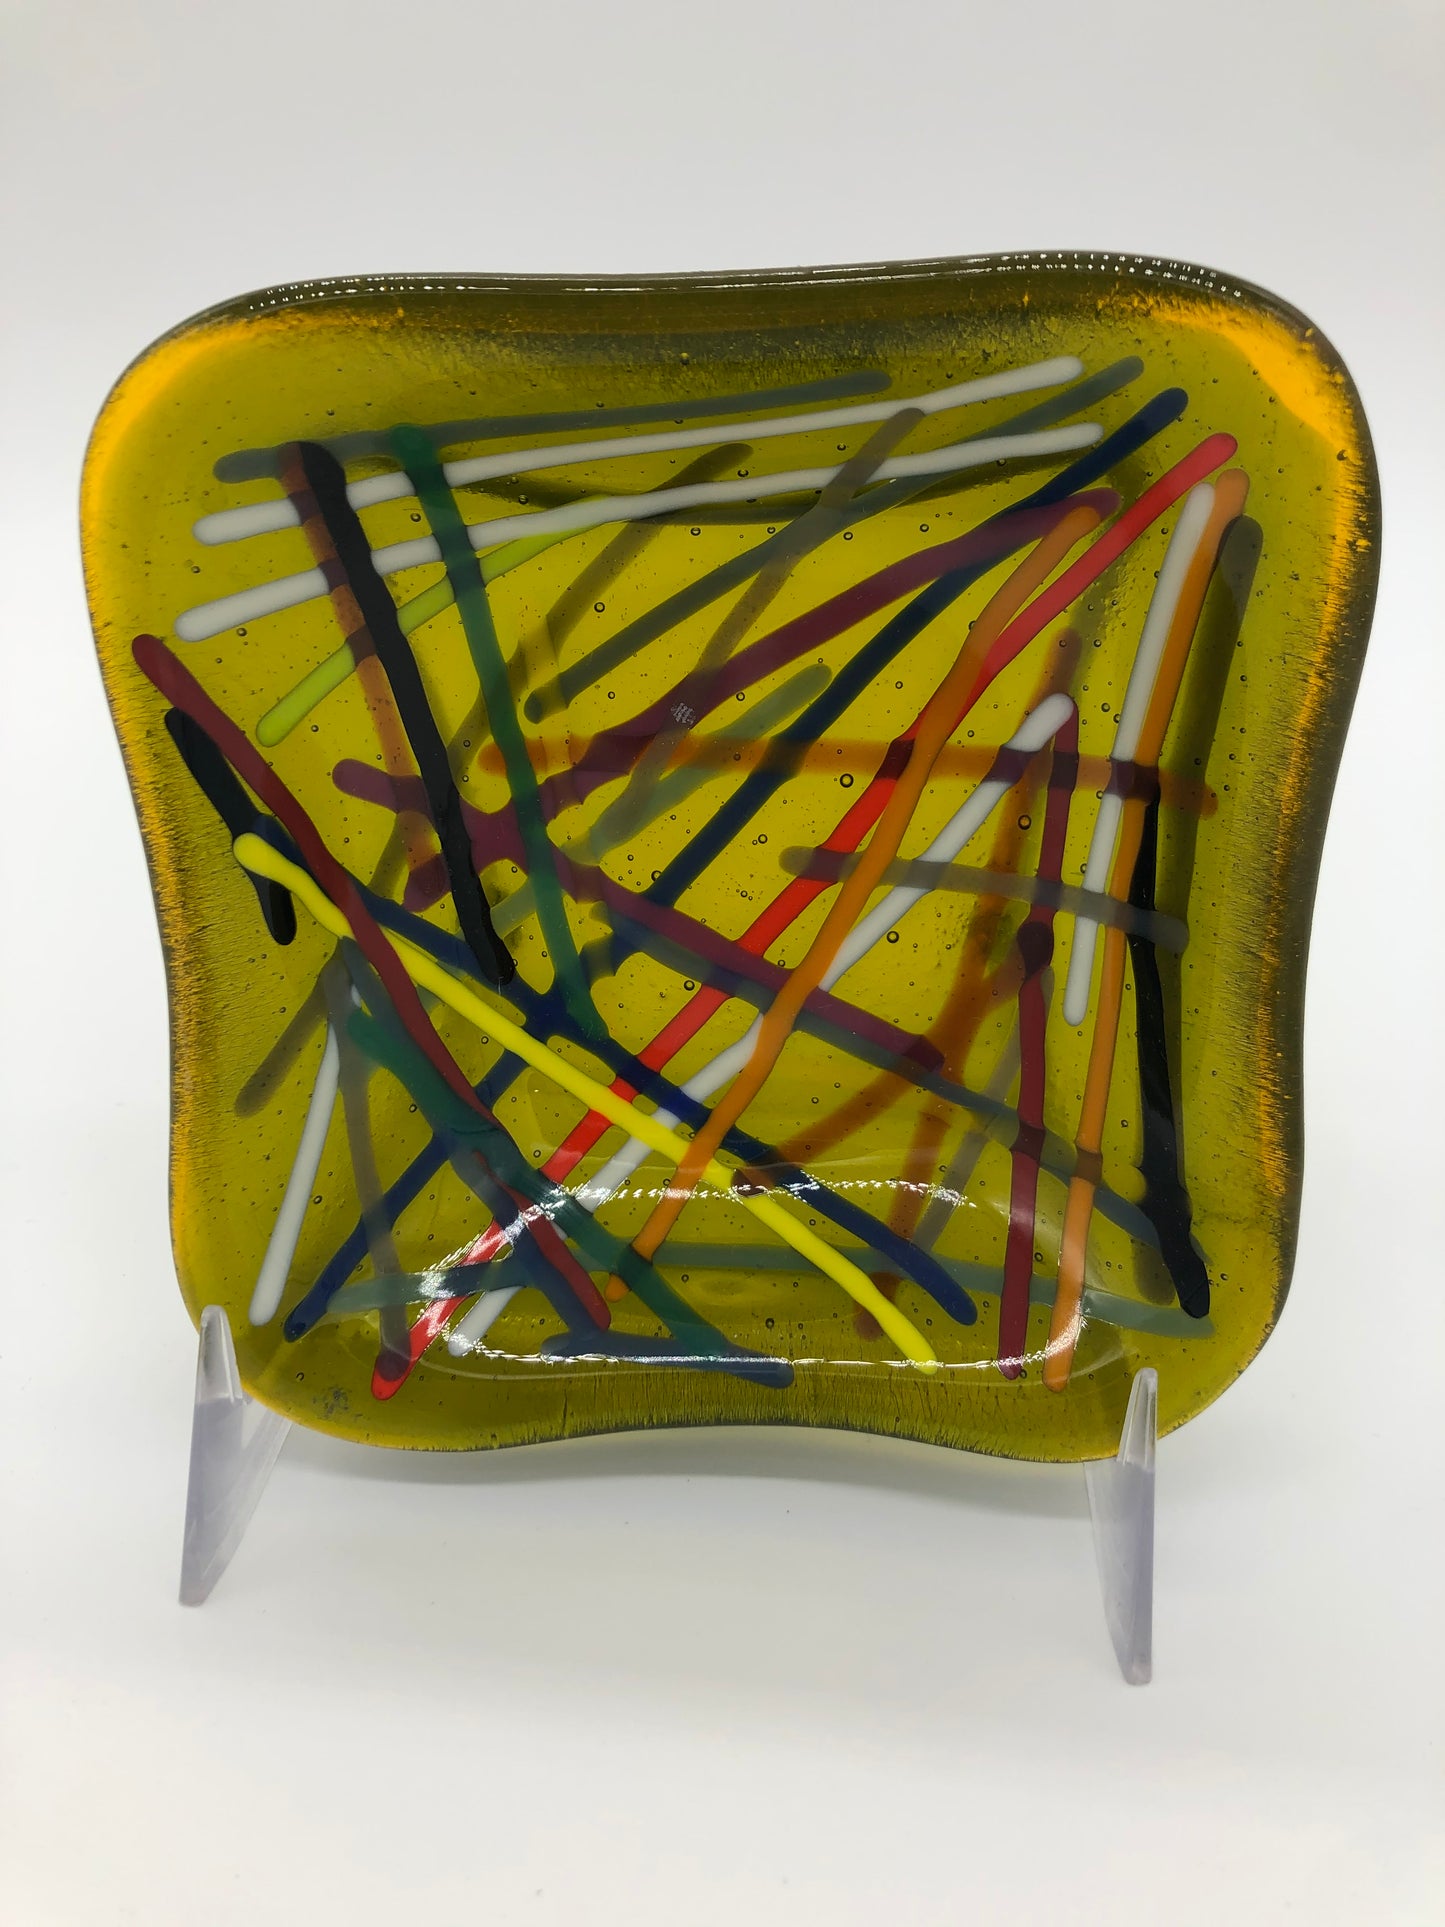 Deep Square Bowl - Multi Color Stringers on Trans Yellow